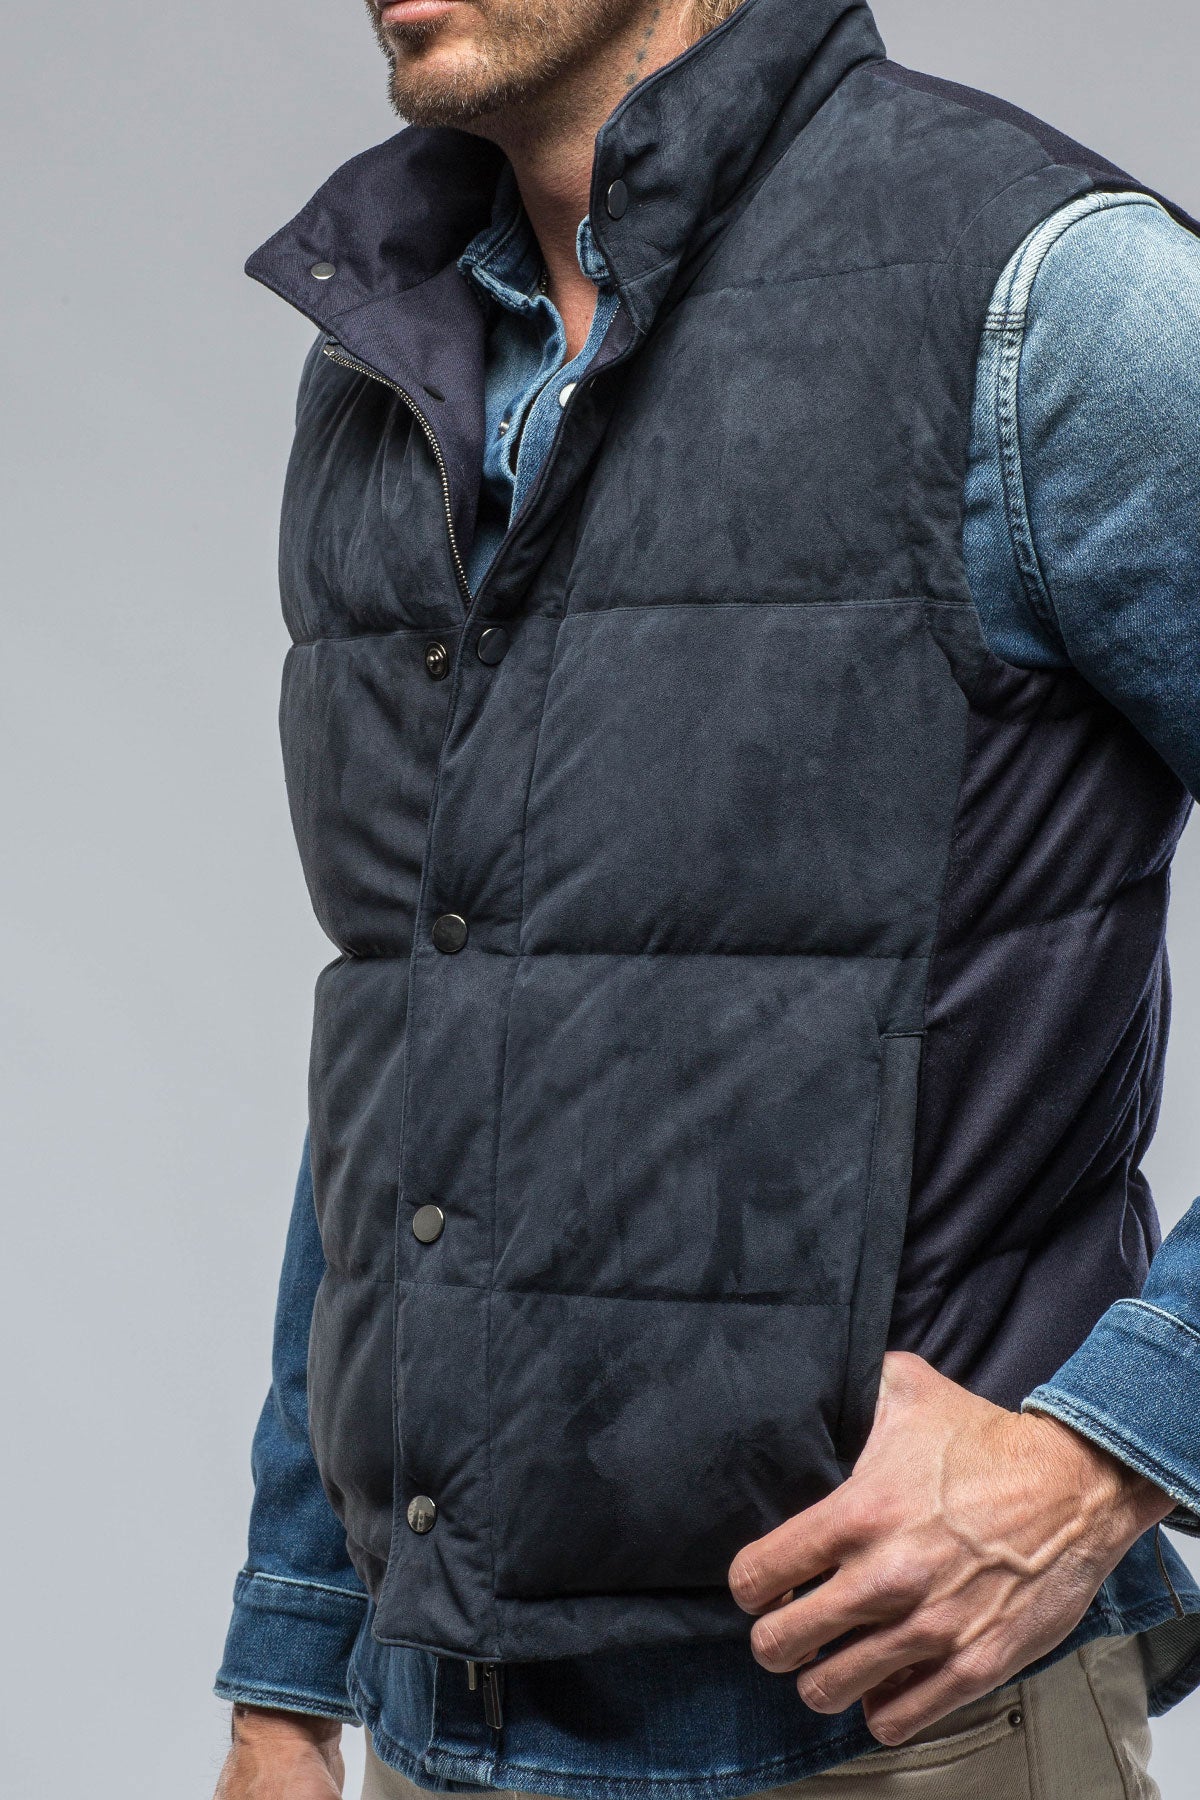 Two Arrows Vest in Navy | Mens - Outerwear - Leather | Gimo's